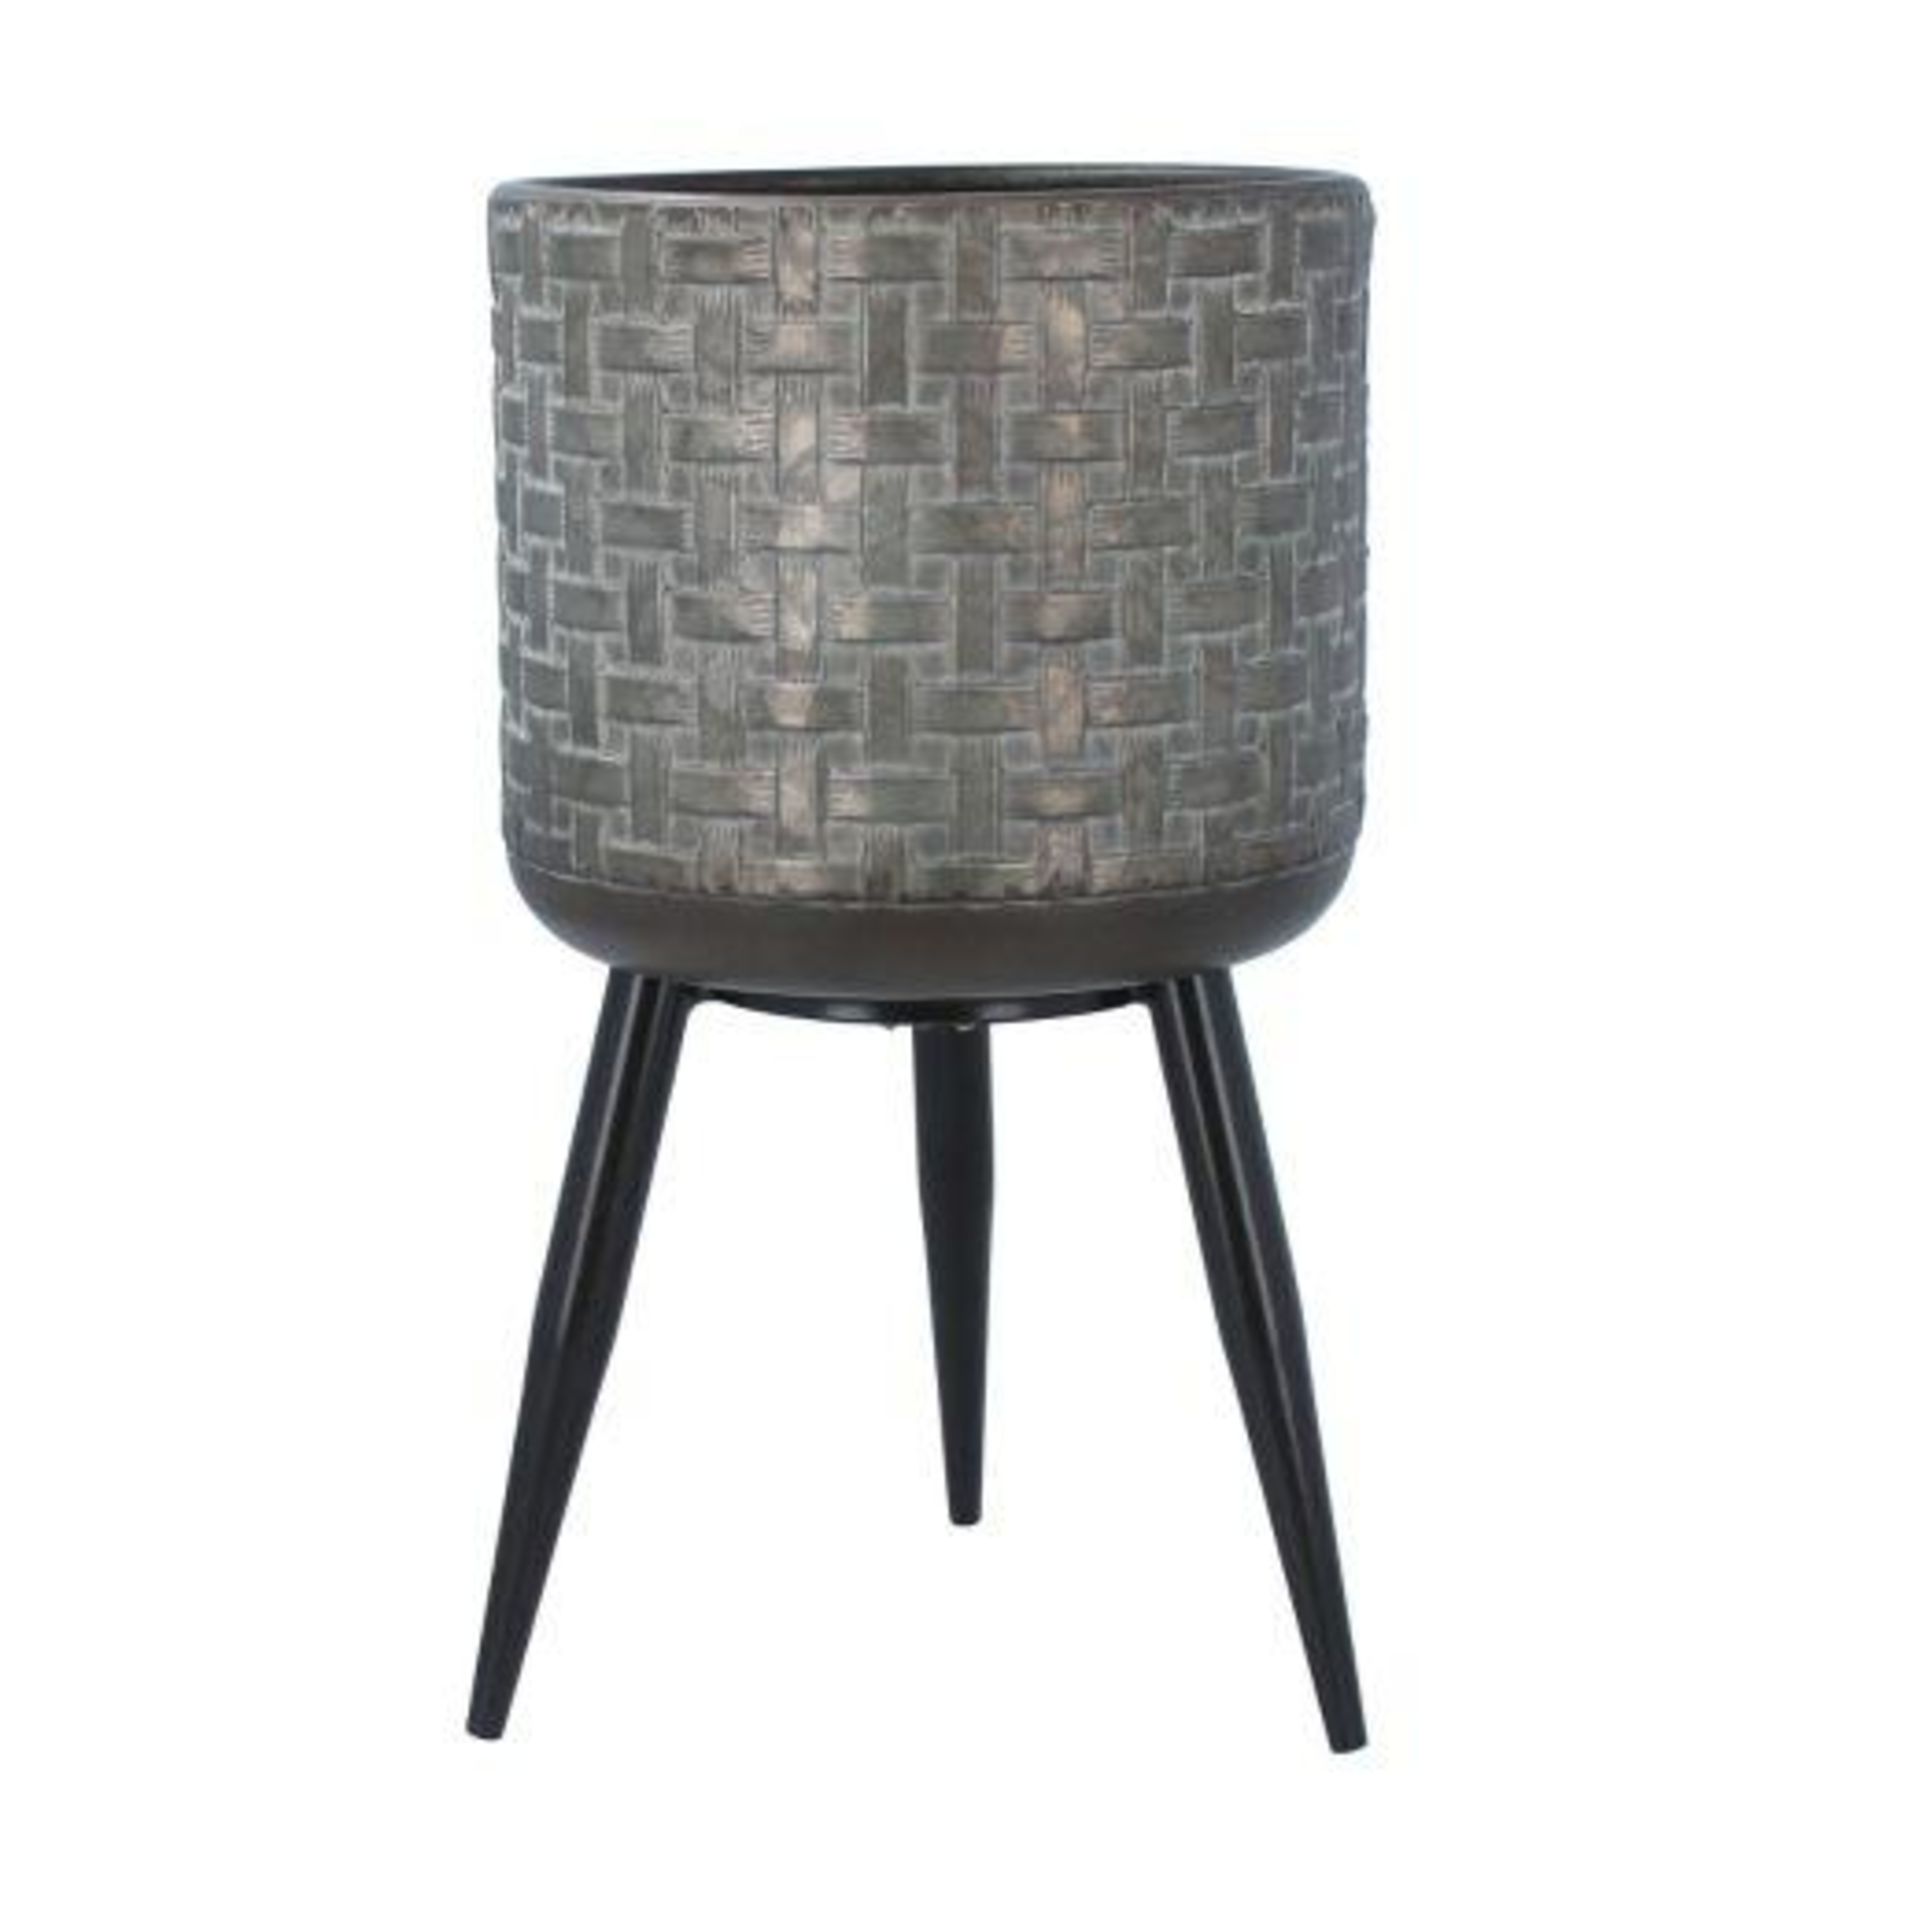 PALLET TO INCLUDE 60 X BRAND NEW GISELA GRAHAM BASKETWEAVE METAL POT COVERS WITH LEGS SIZE LARGE